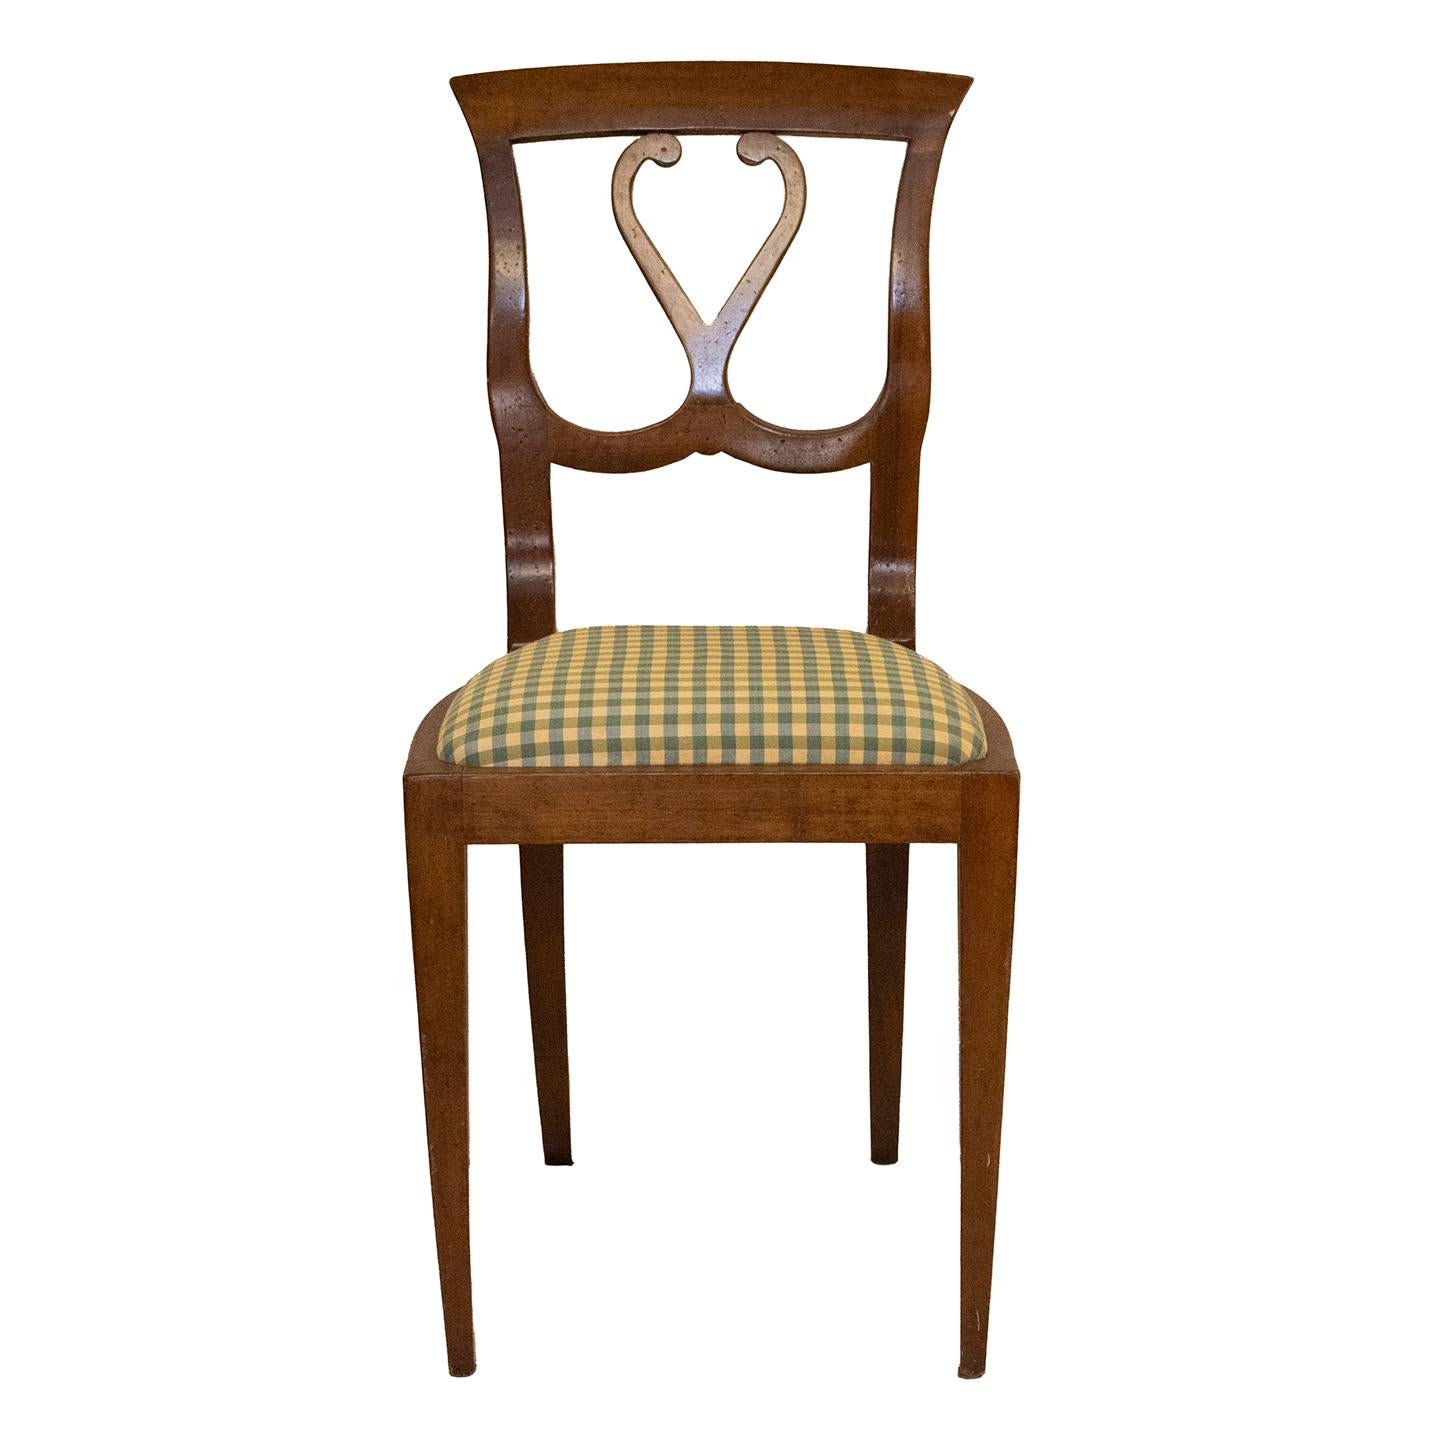 An elegant French provincial single chair that is delicate in its proportions. The chair features an open back with scrollwork and gentle curves.T he seat is upholstered in a silk check. The chair has a gorgeous patina and has aged well like a fine